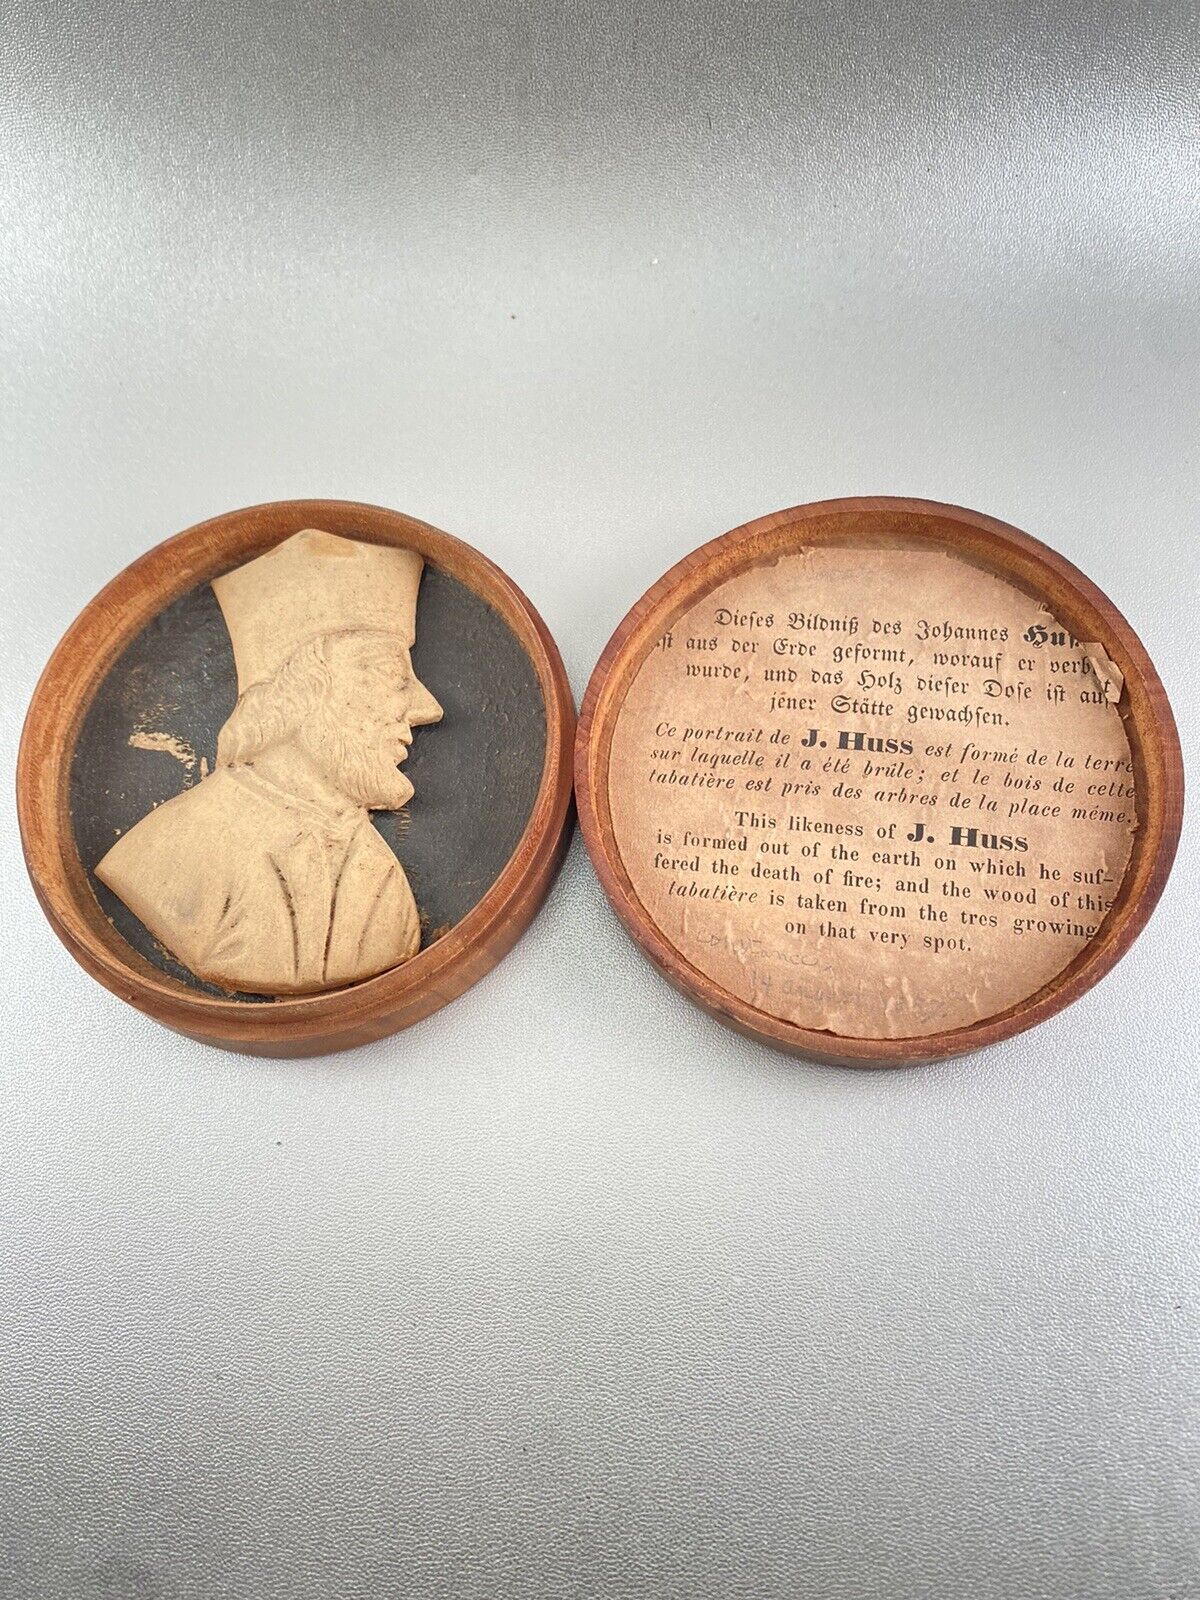 Rare 1857 Relic of J. Huss - Died at Stake for religious